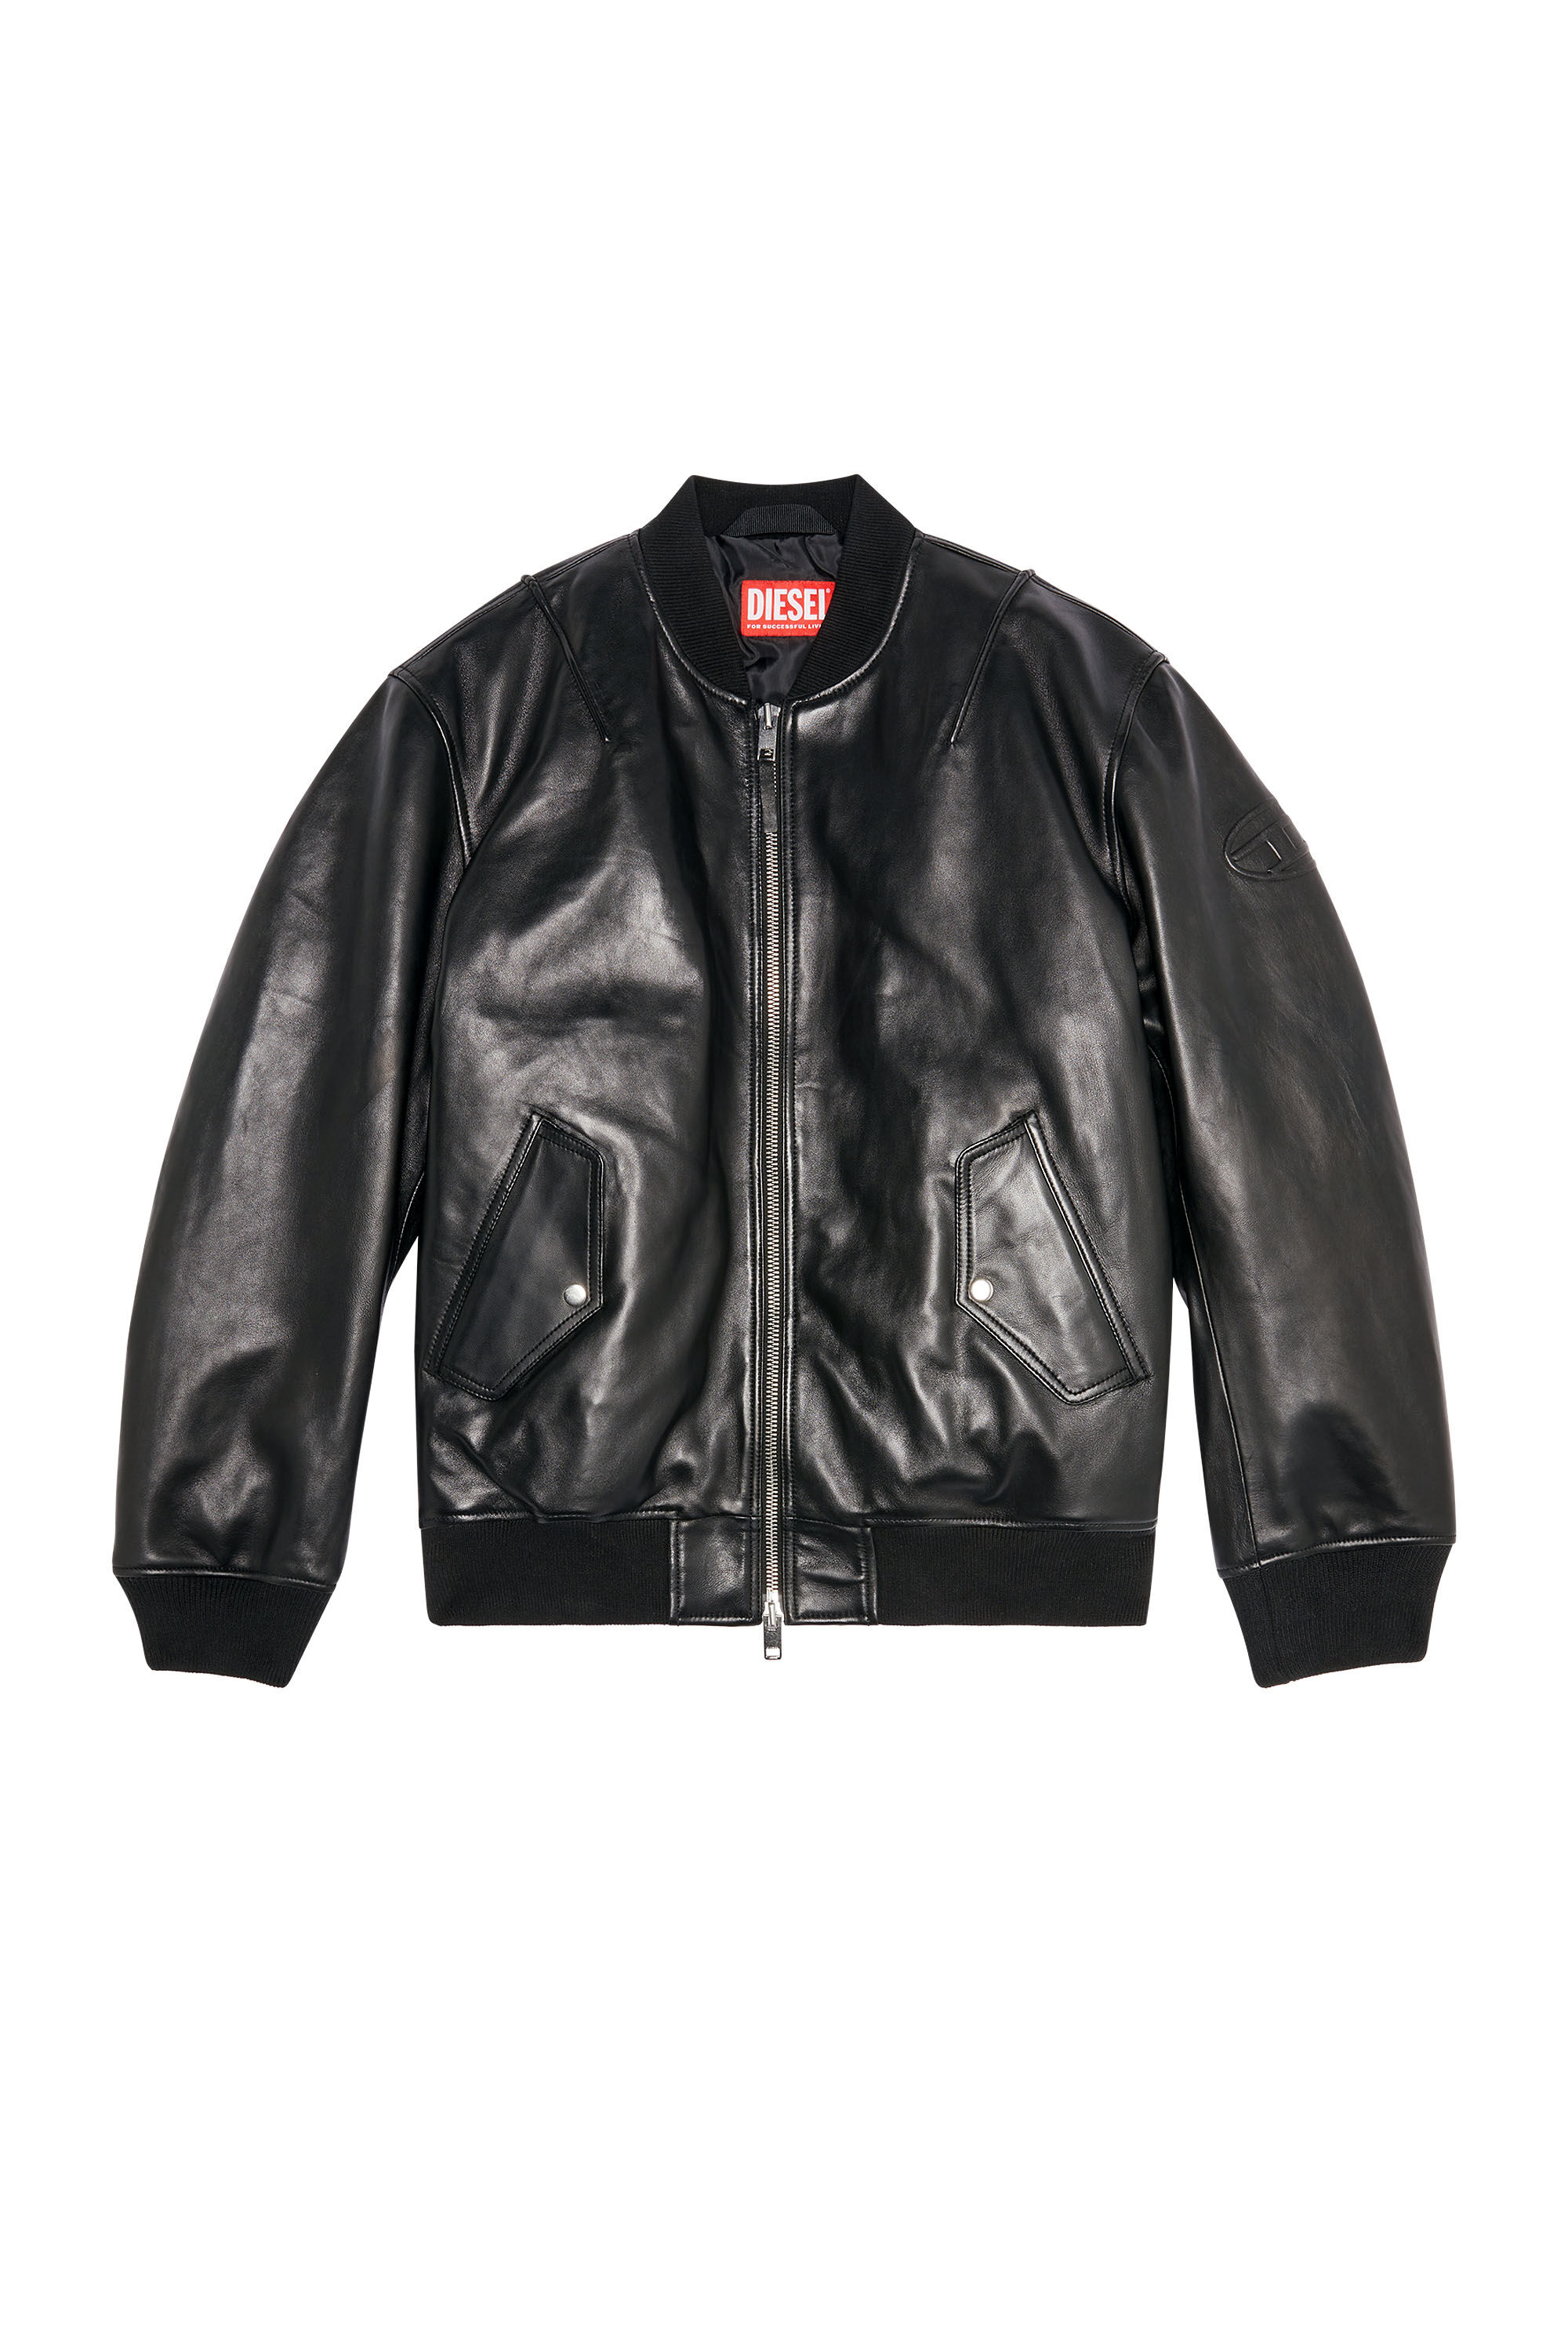 Diesel - L-PRITTS, Male Padded jacket in tumbled leather in Black - Image 2